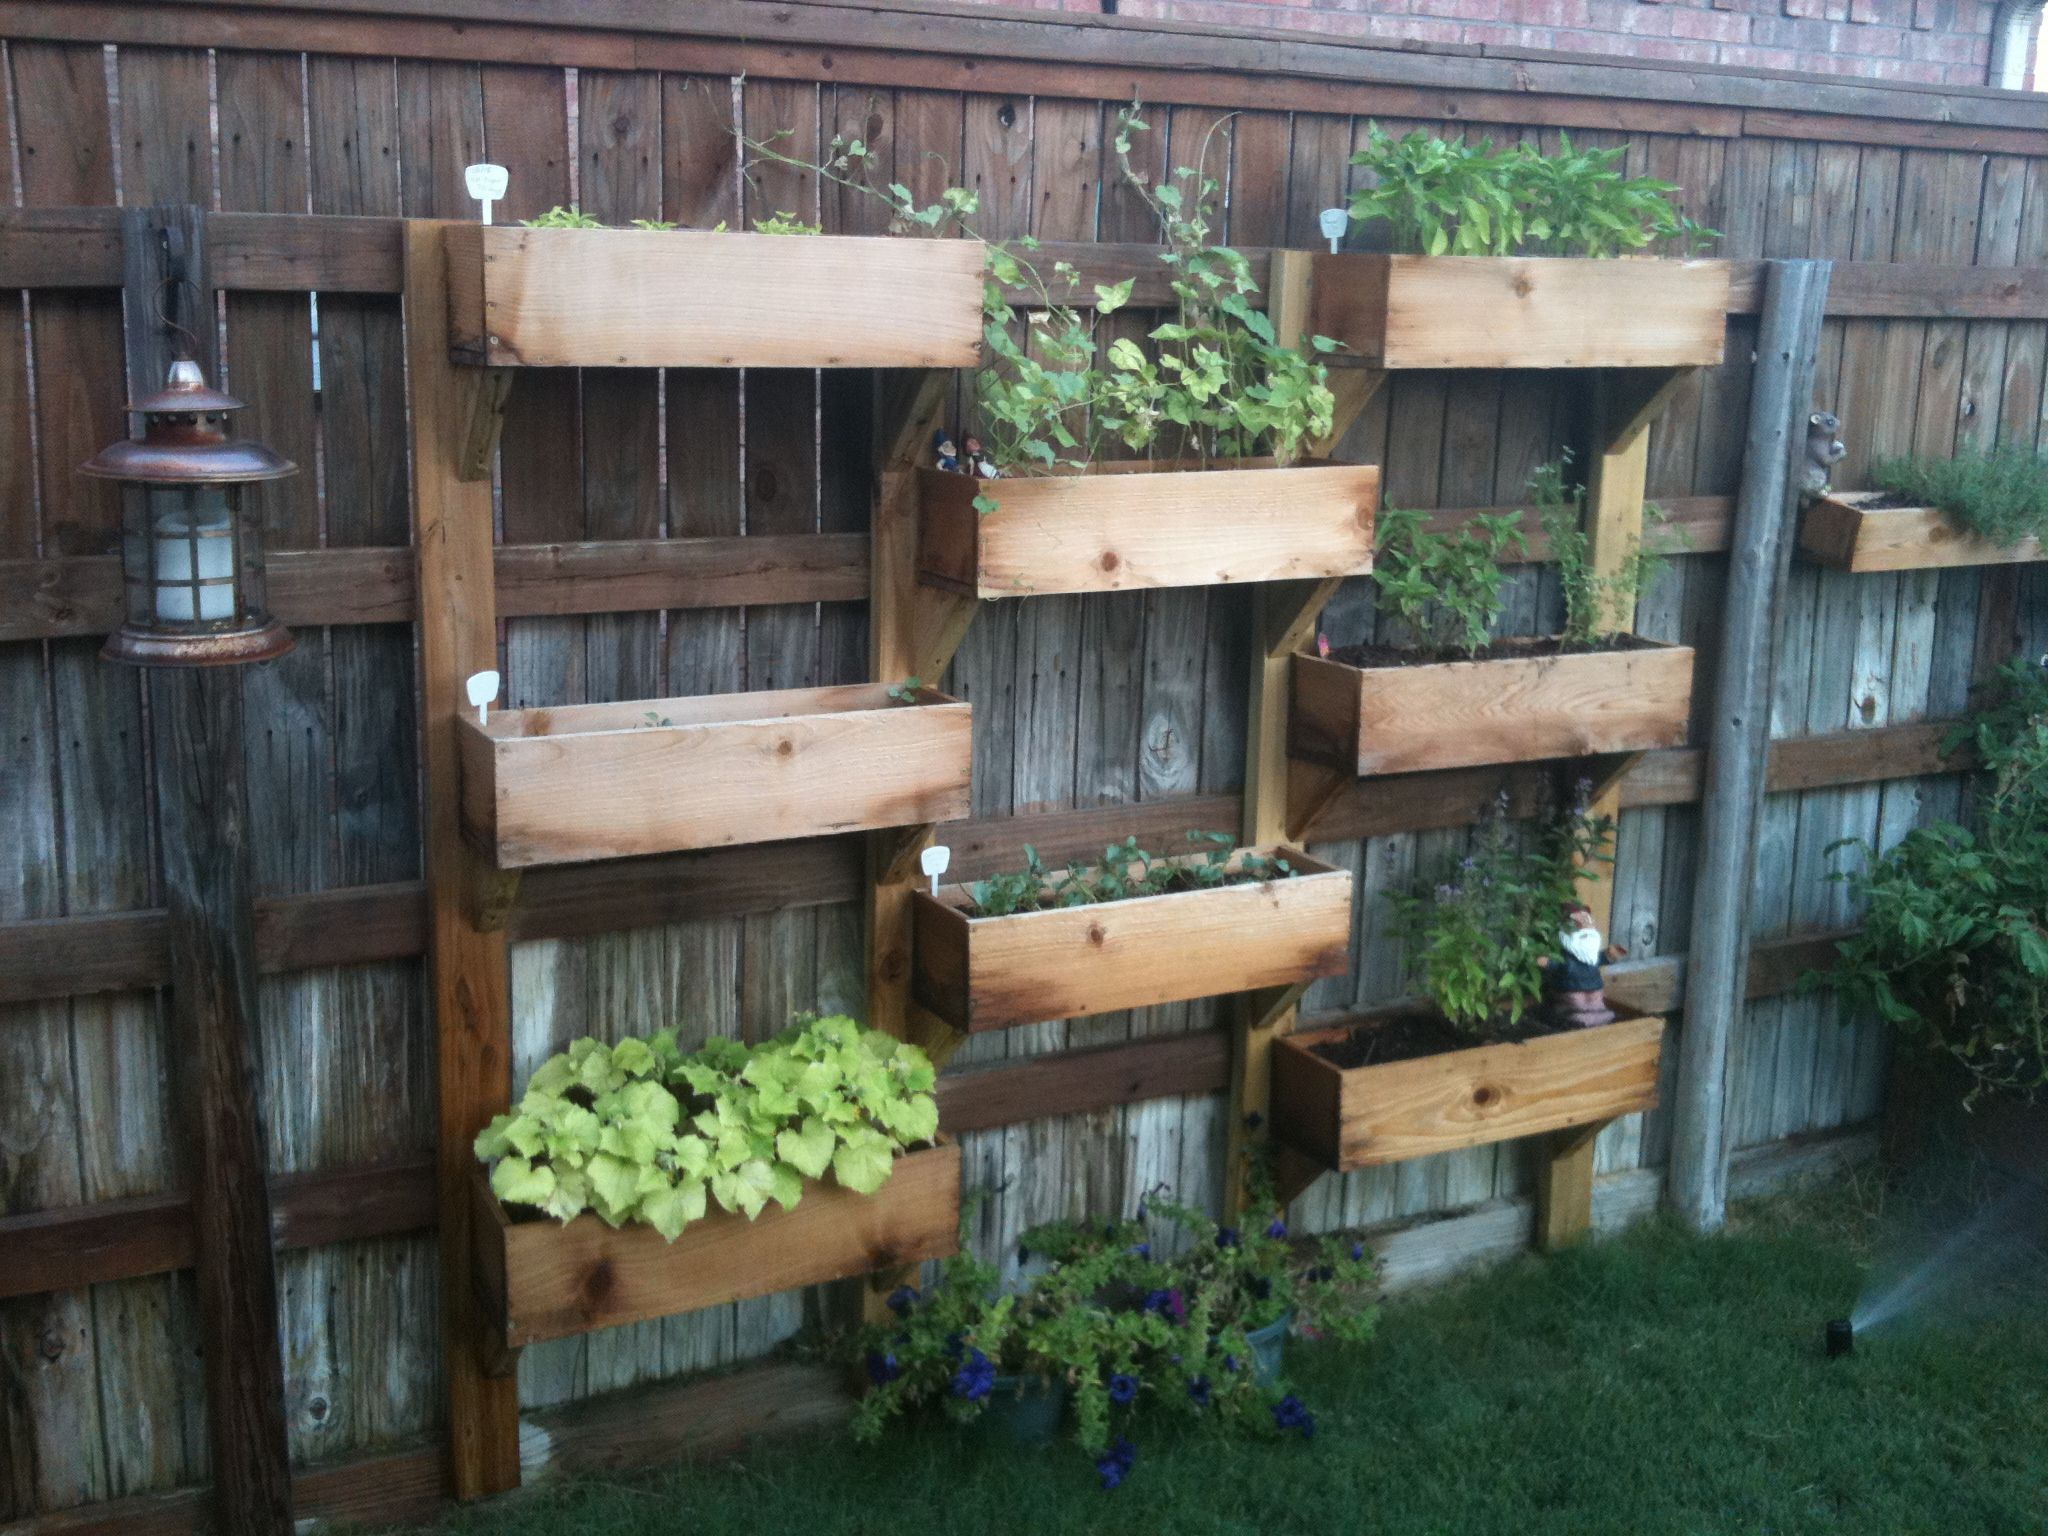 "wish I had seen this before building our raised beds. =)"